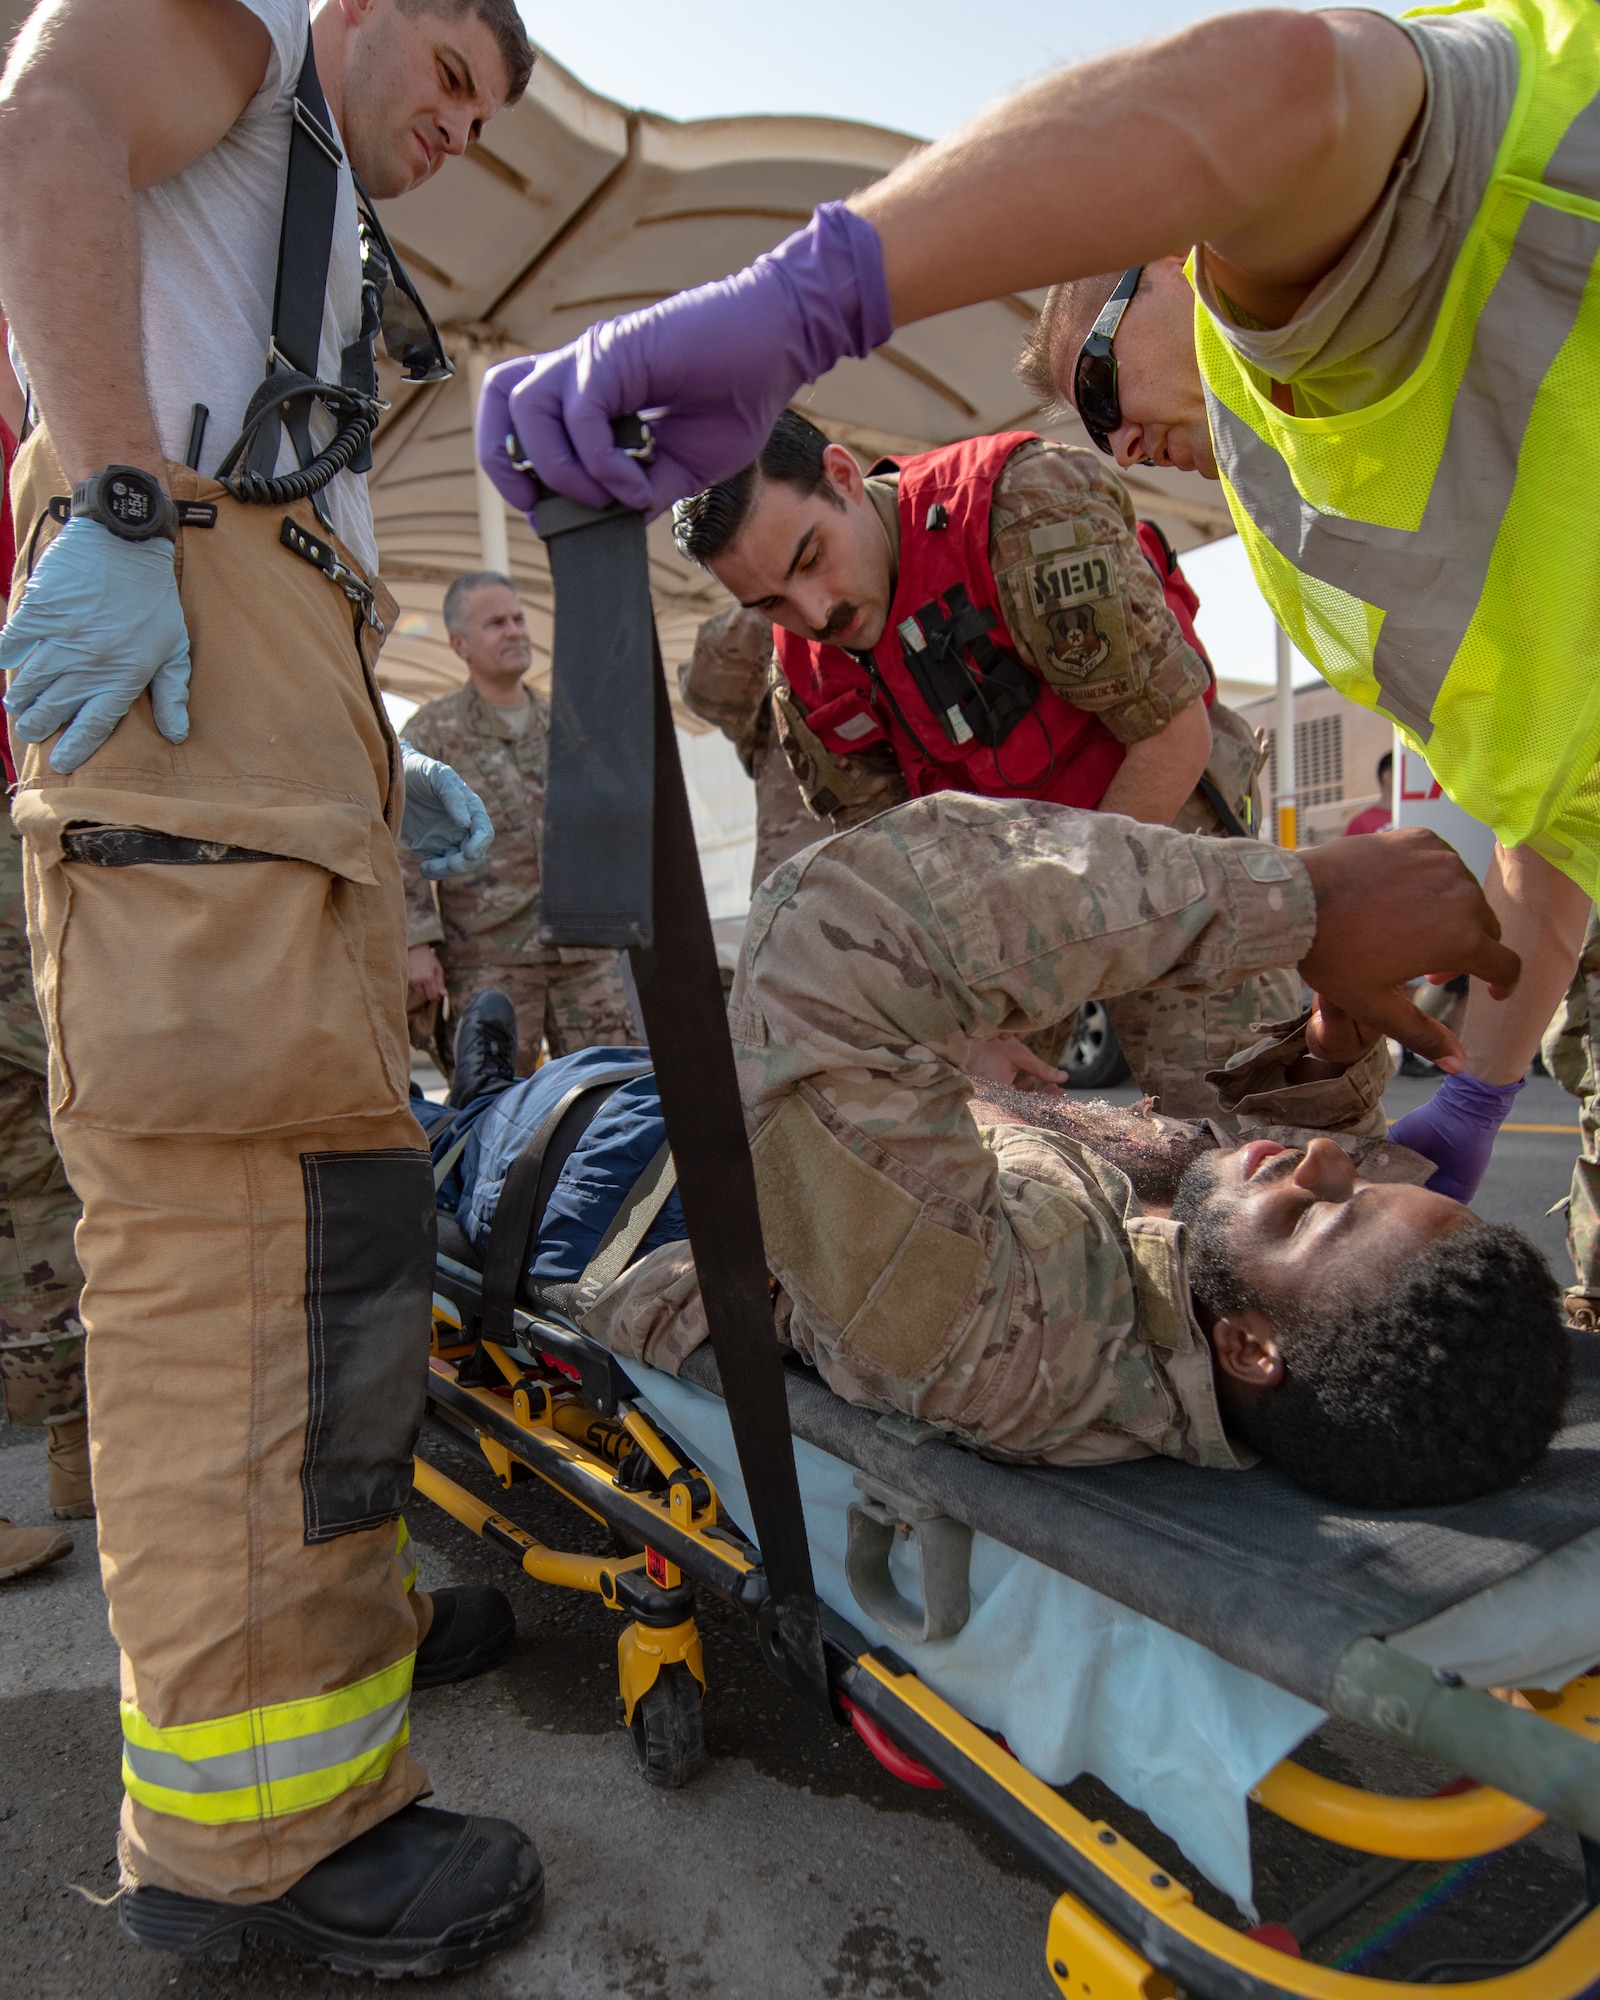 380th Air Expeditionary Wing firefighters and medics secure a moulage victim to a gurney during a large first responder exercise Sept. 24, 2019, at Al Dhafra Air Base, United Arab Emirates. A variety of agencies including medics, firefighters and security forces defenders participated in the exercise to test their readiness, knowledge of emergency procedures and interagency cooperation amongst the wing’s first responders. (U.S. Air Force photo by Staff Sgt. Chris Thornbury)